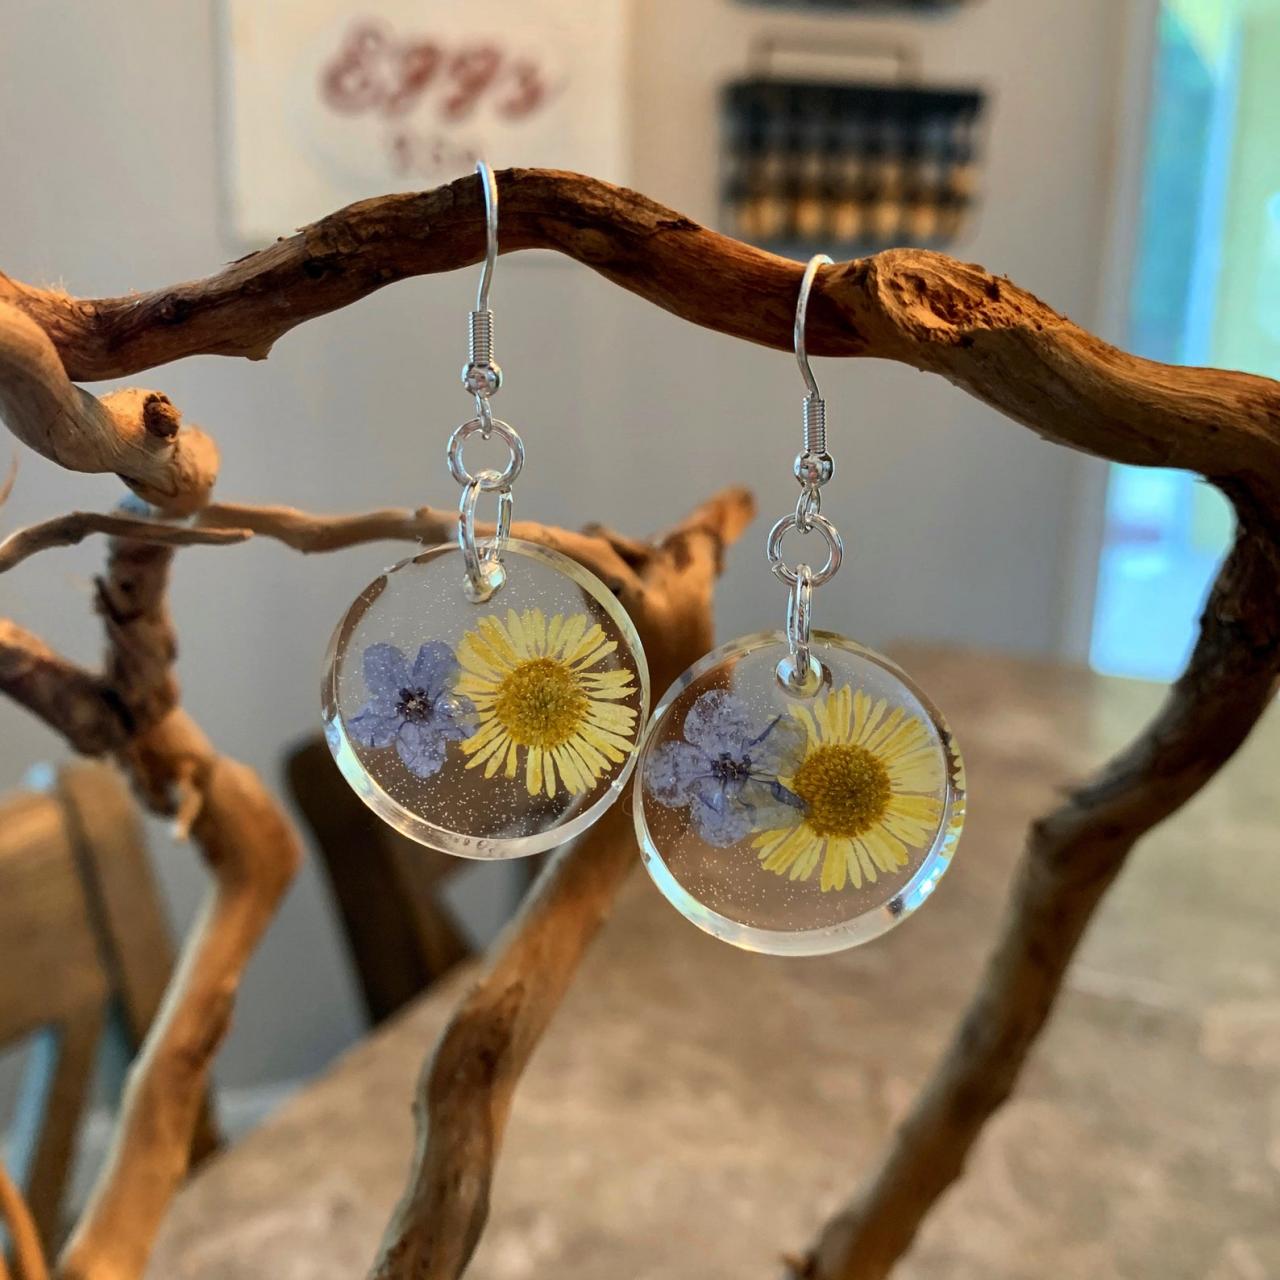 Pressed Flowers Earrings, Resin Flower Jewelry, Unique Gift For Grad,preserved Flowers, Boho, Minimalist Jewelry Gifts, Daisy Forget Me Not